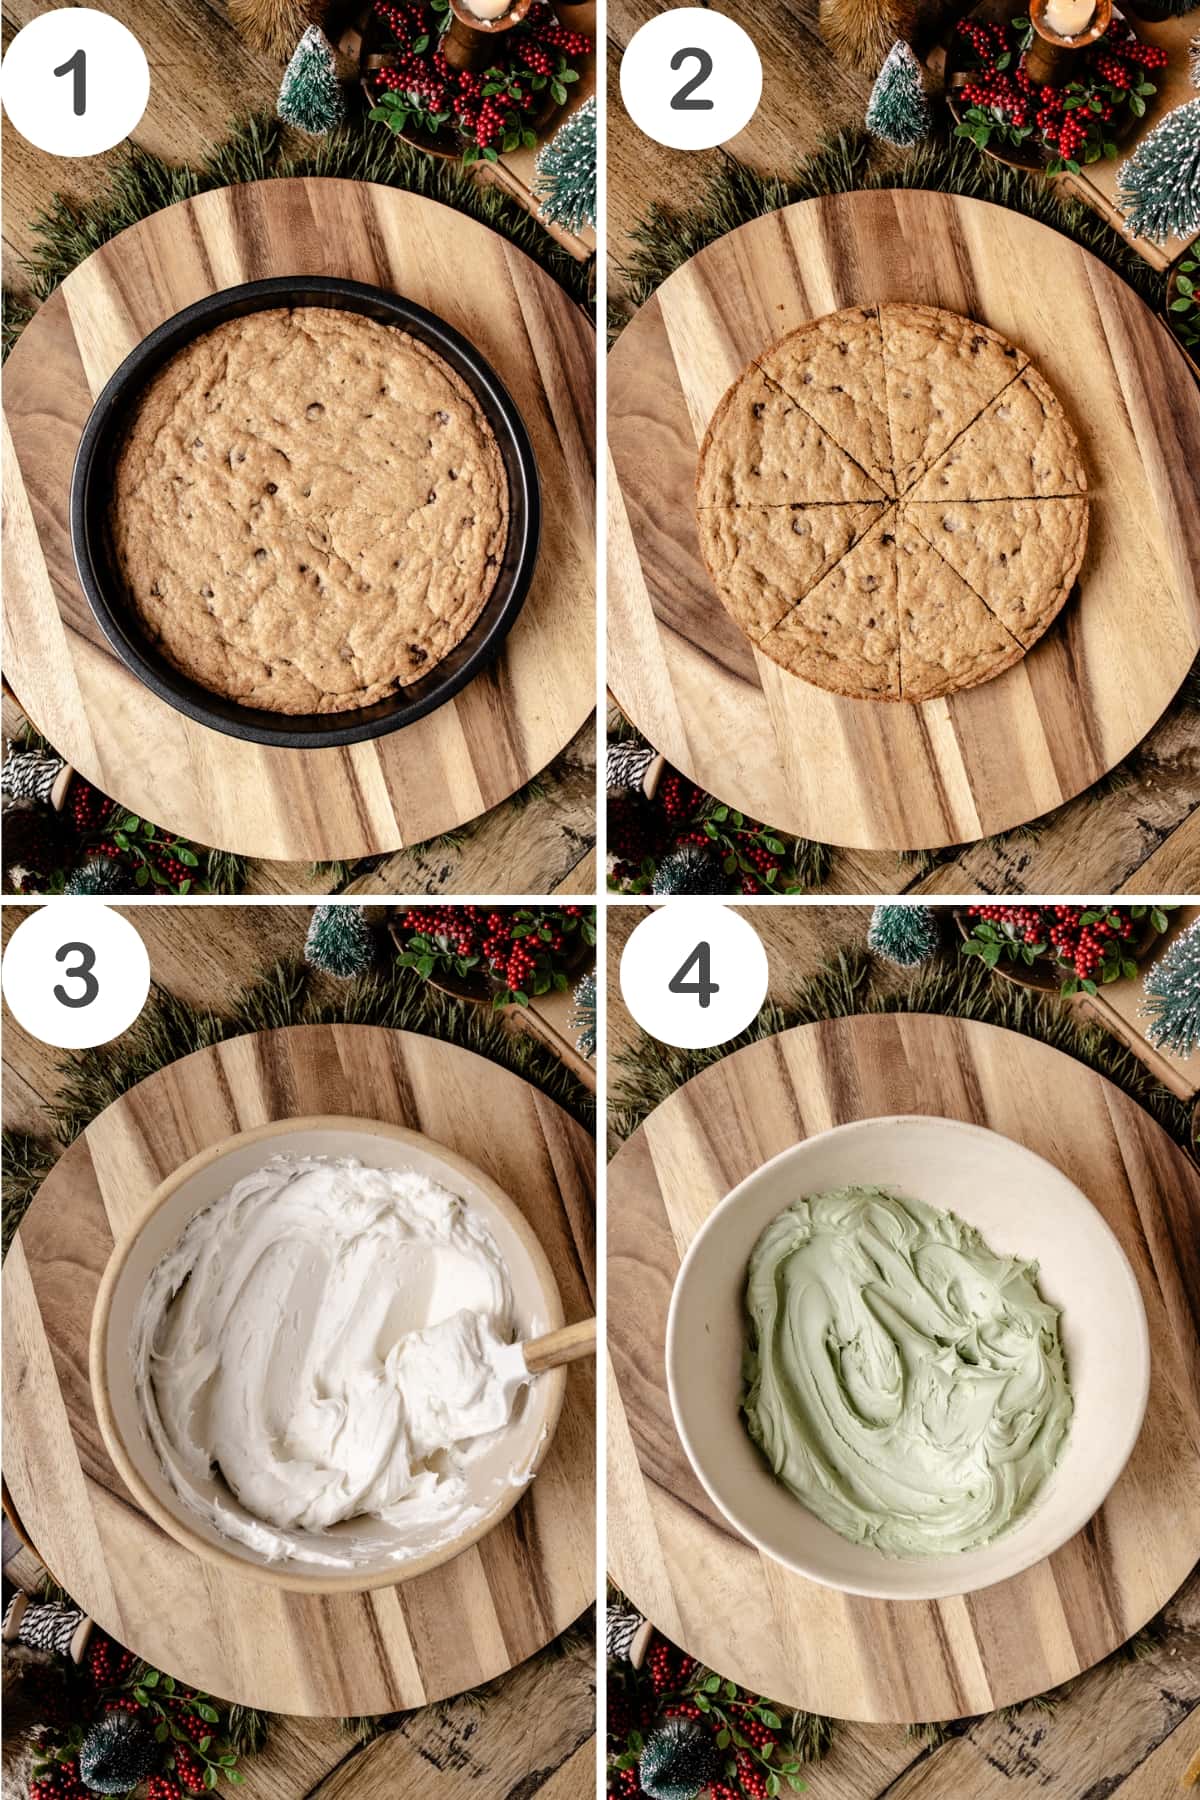 numbered step by step photos showing how to make the cookie cake and frosting 